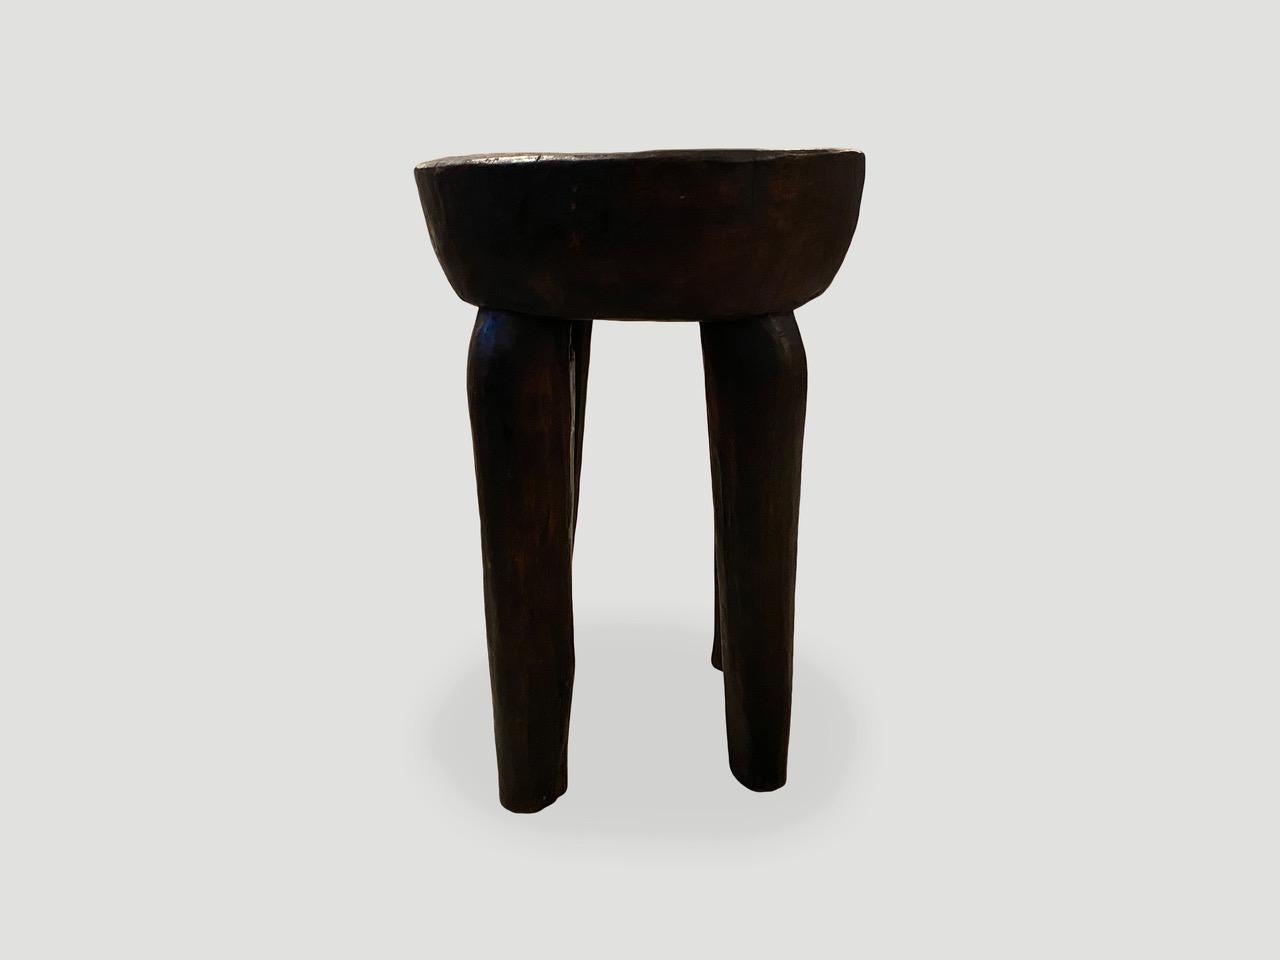 Tribal Andrianna Shamaris African Side Table or Stool